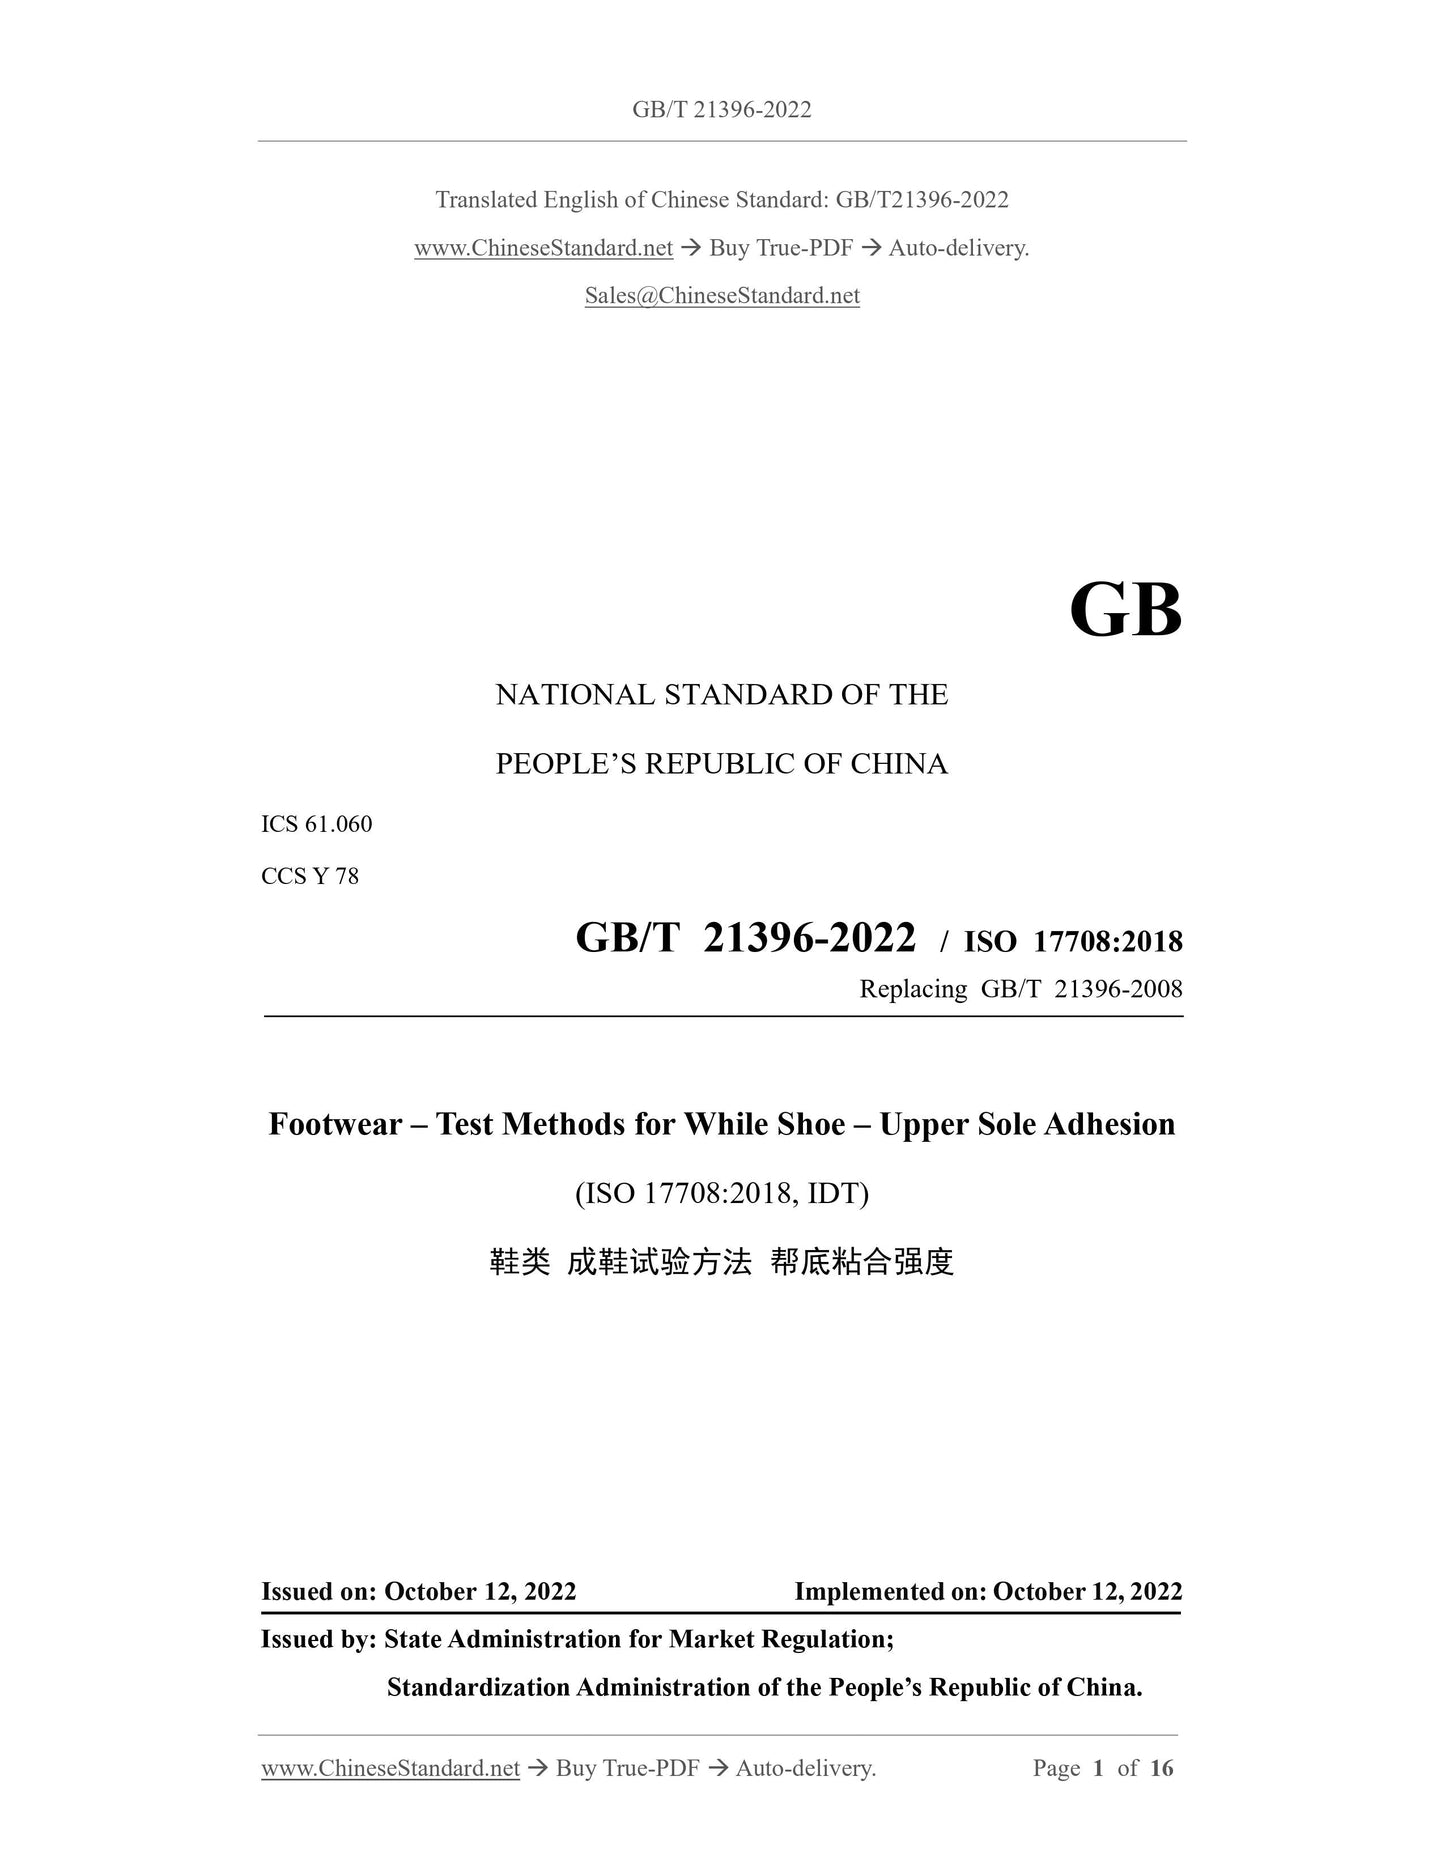 GB/T 21396-2022 Page 1